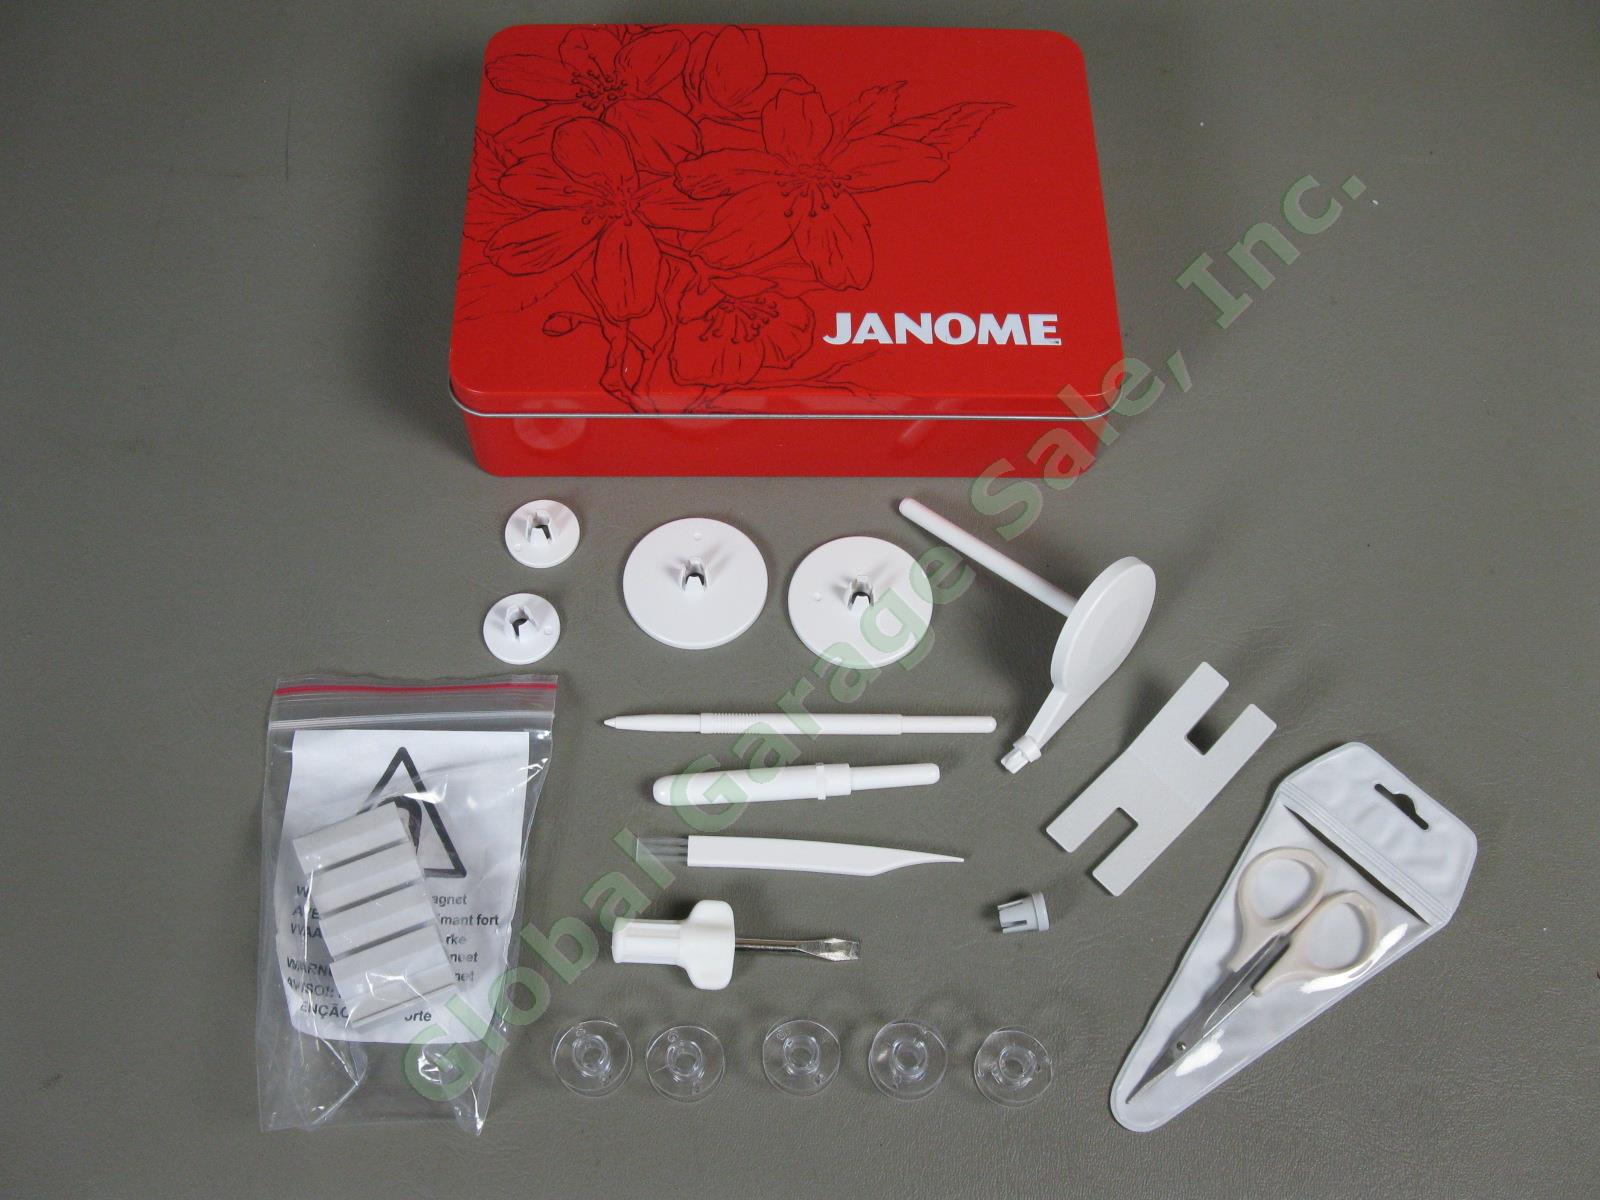 Janome Skyline S9 Sewing + Embroidery Machine Mint Condition! Barely Used! 13